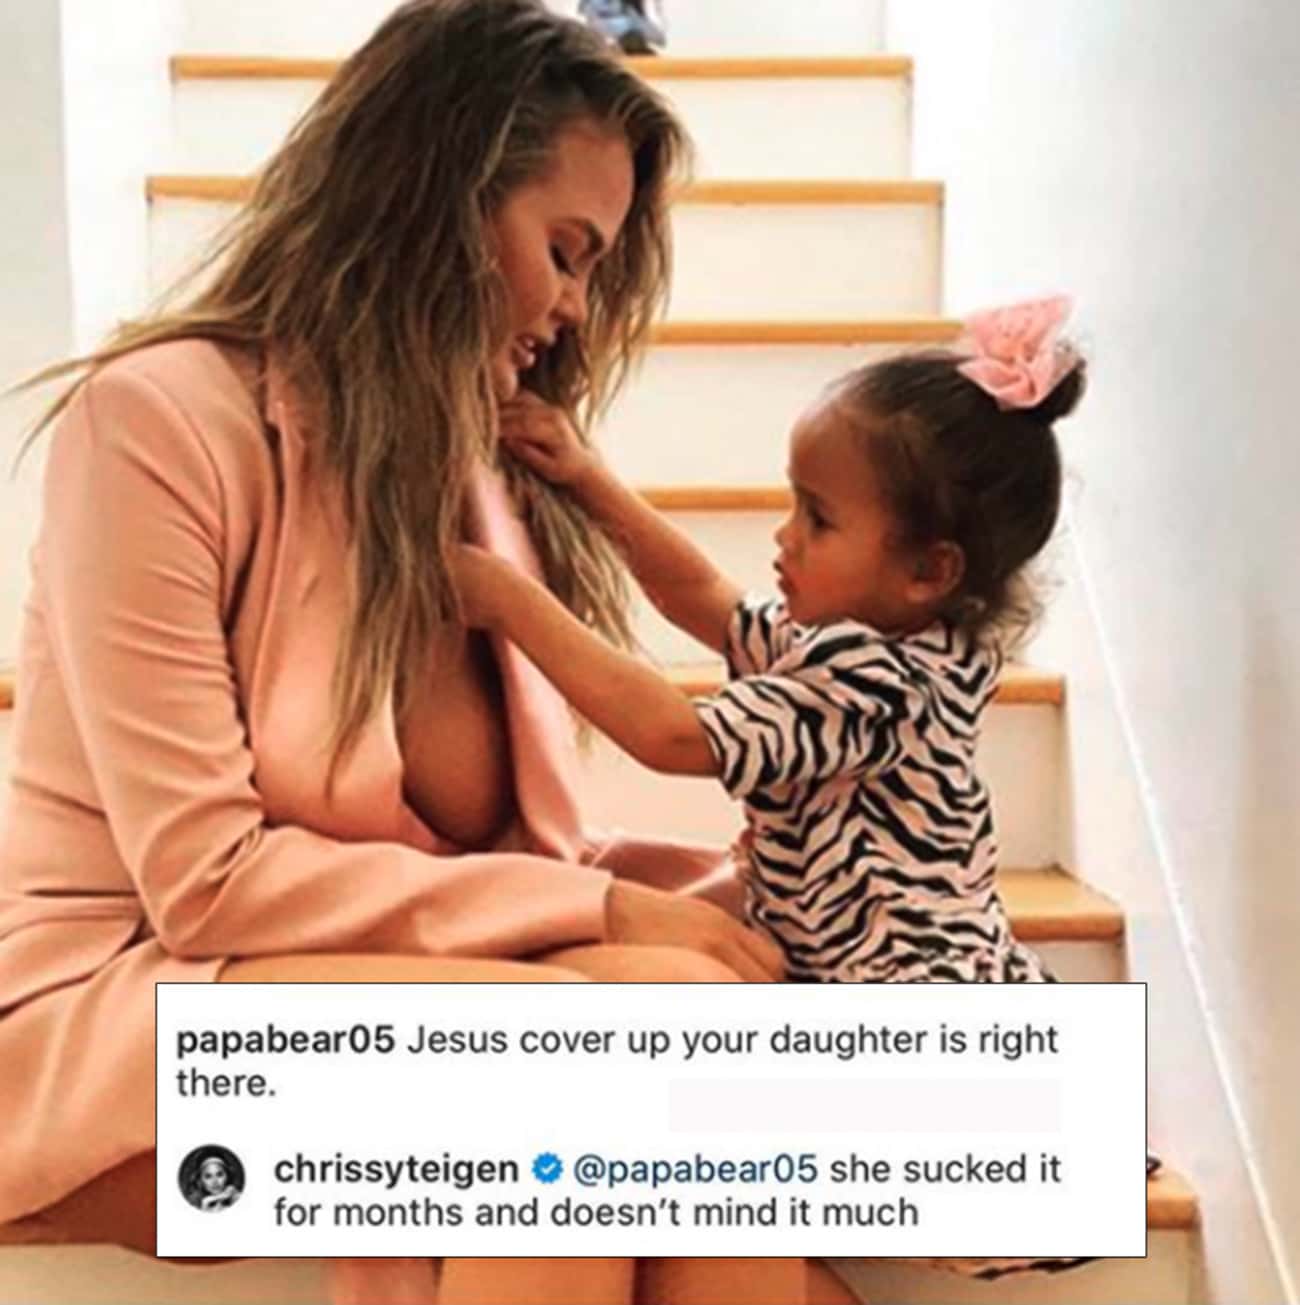 celebs savage replies - the whitworth - papabear05 Jesus cover up your daughter is right there. chrissyteigen she sucked it for months and doesn't mind it much